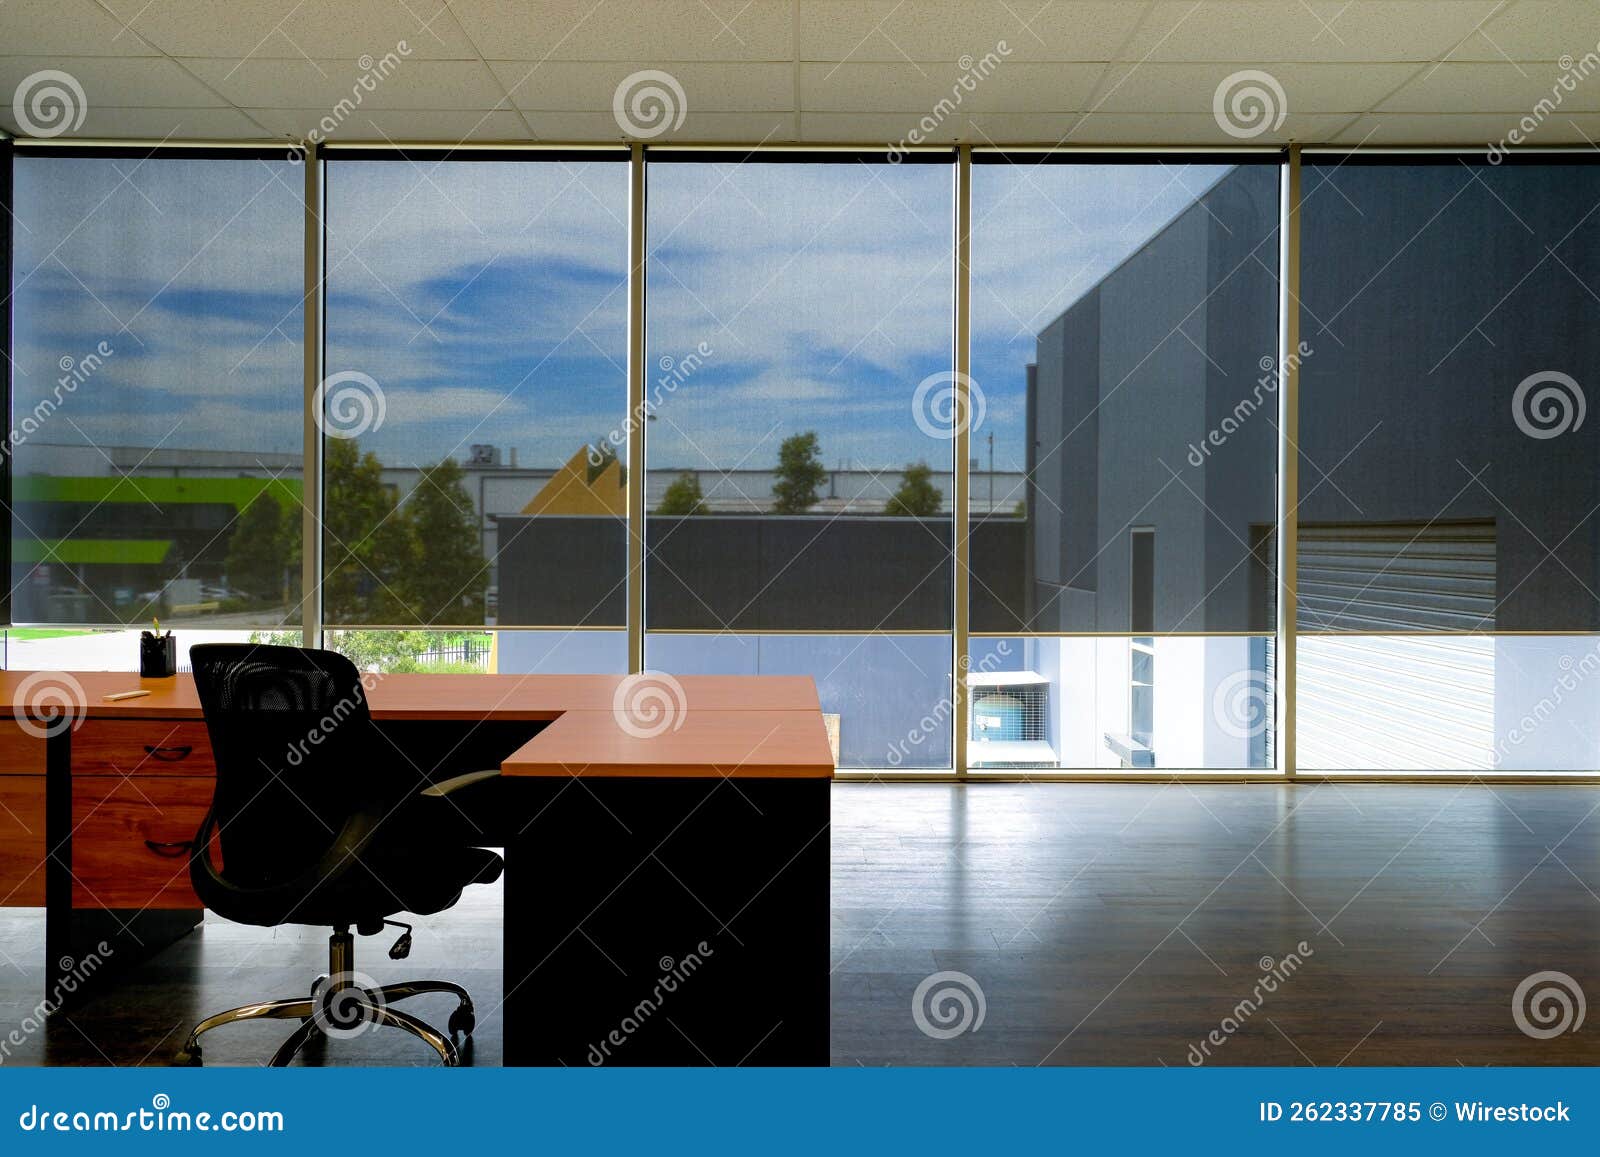 automated roller blinds in modern office